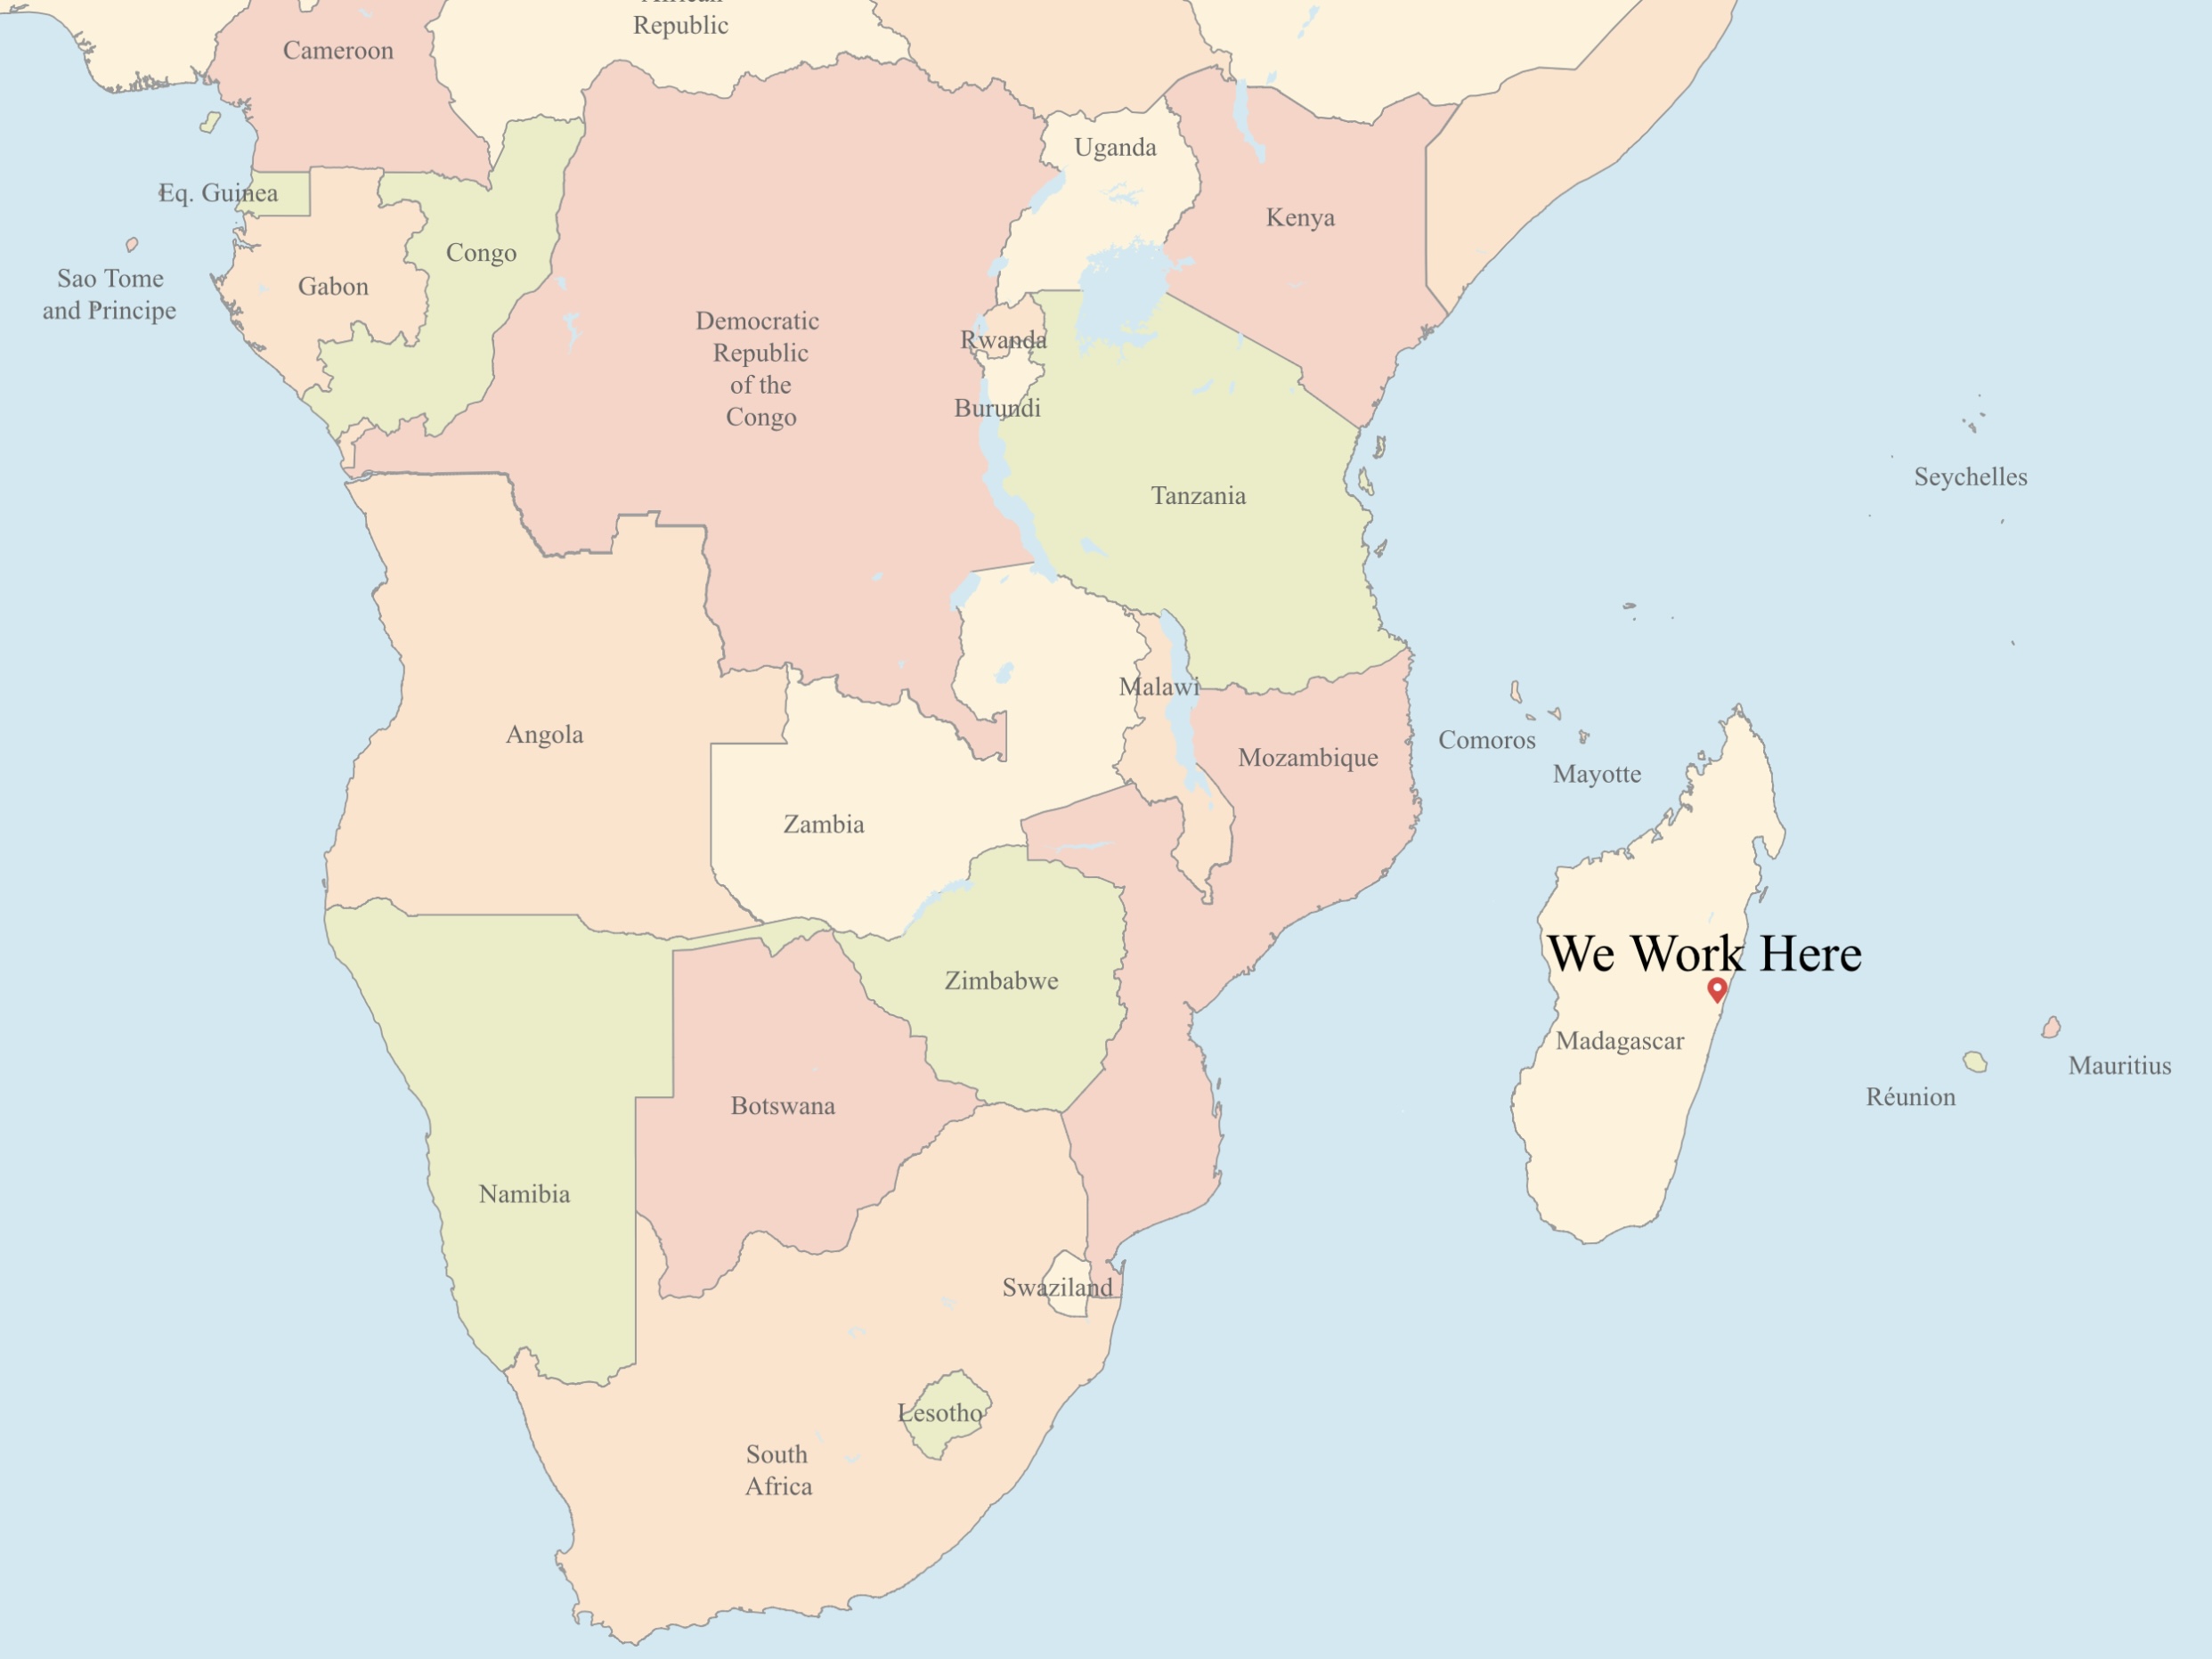 Map of Madagascar and the Southern Portion of Africa.